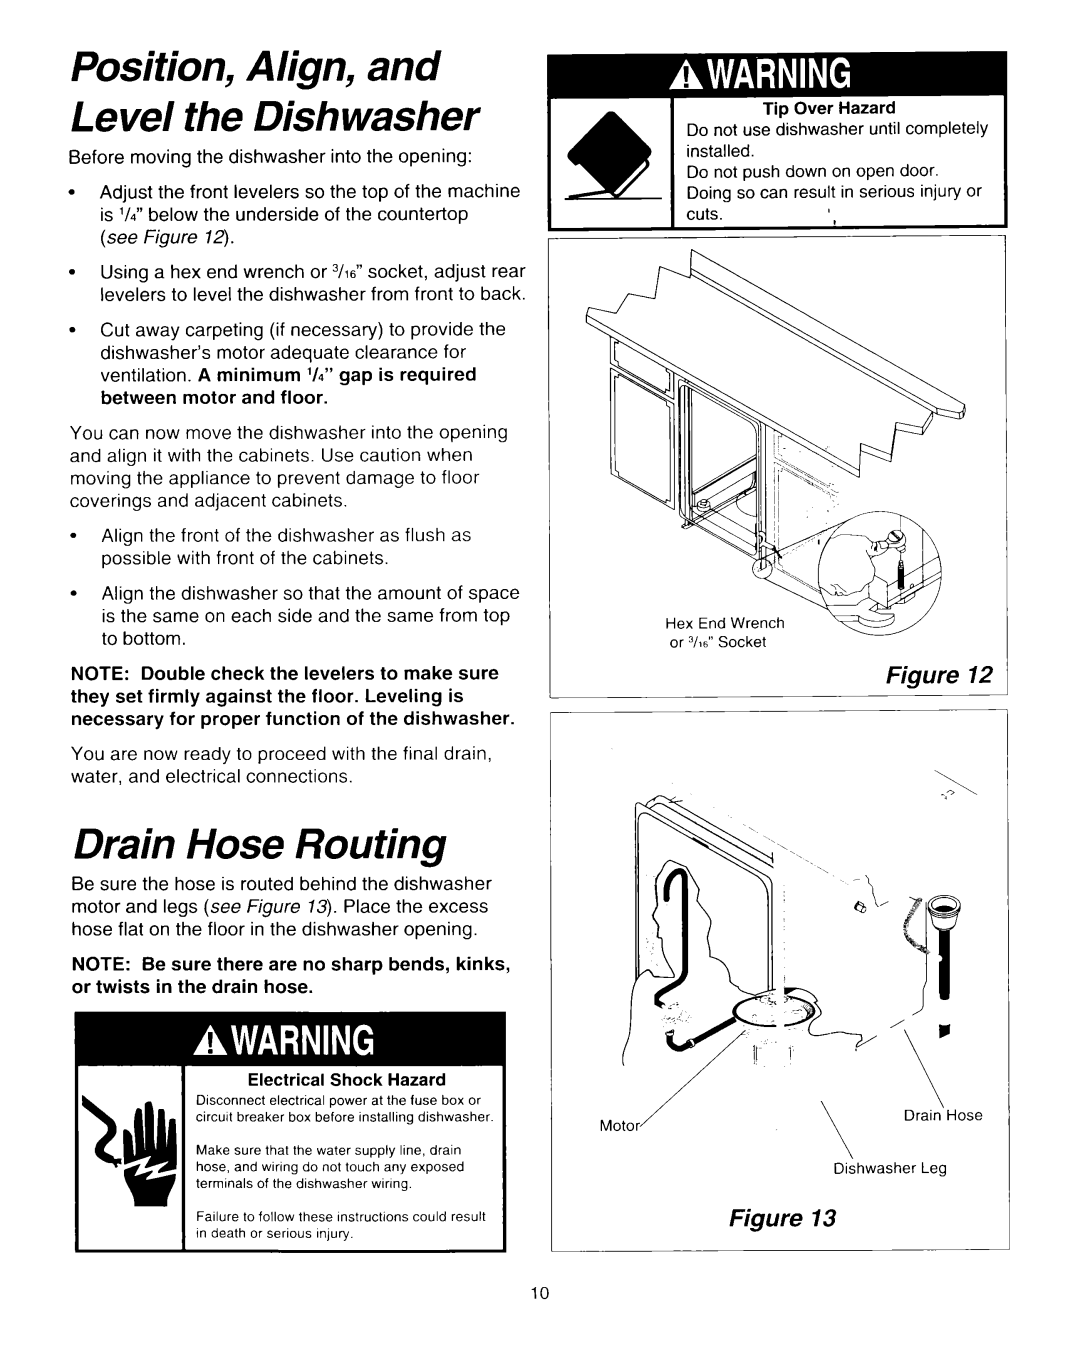 Whirlpool RUD0800EB installation instructions Drain Hose Routing, Position, Align, and Level the Dishwasher, Figure 